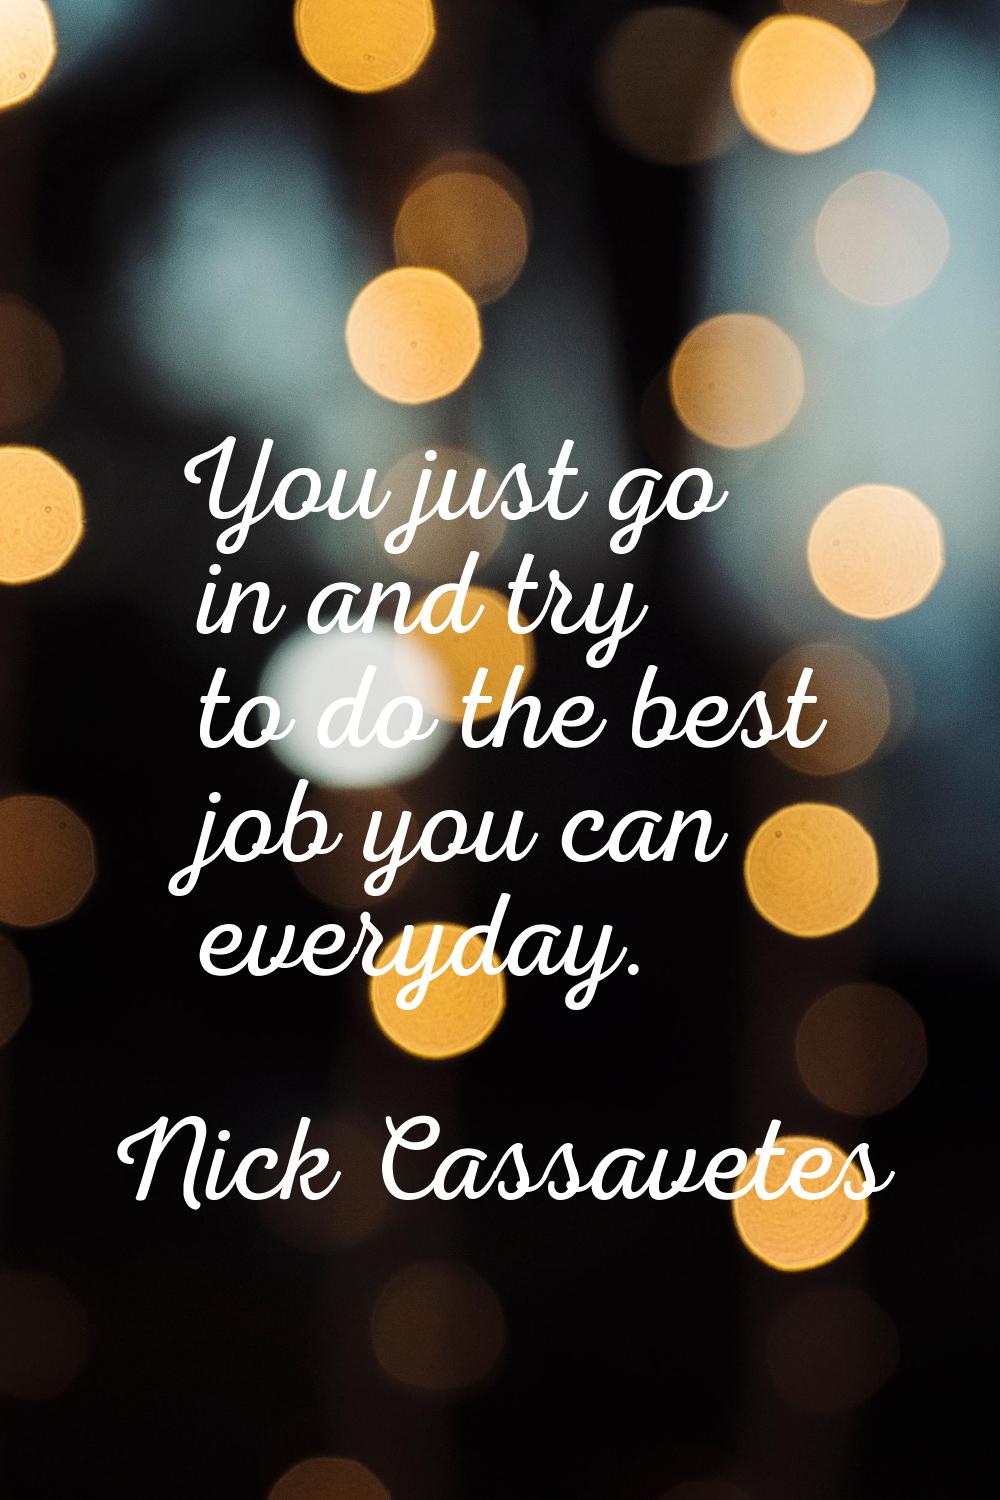 You just go in and try to do the best job you can everyday.